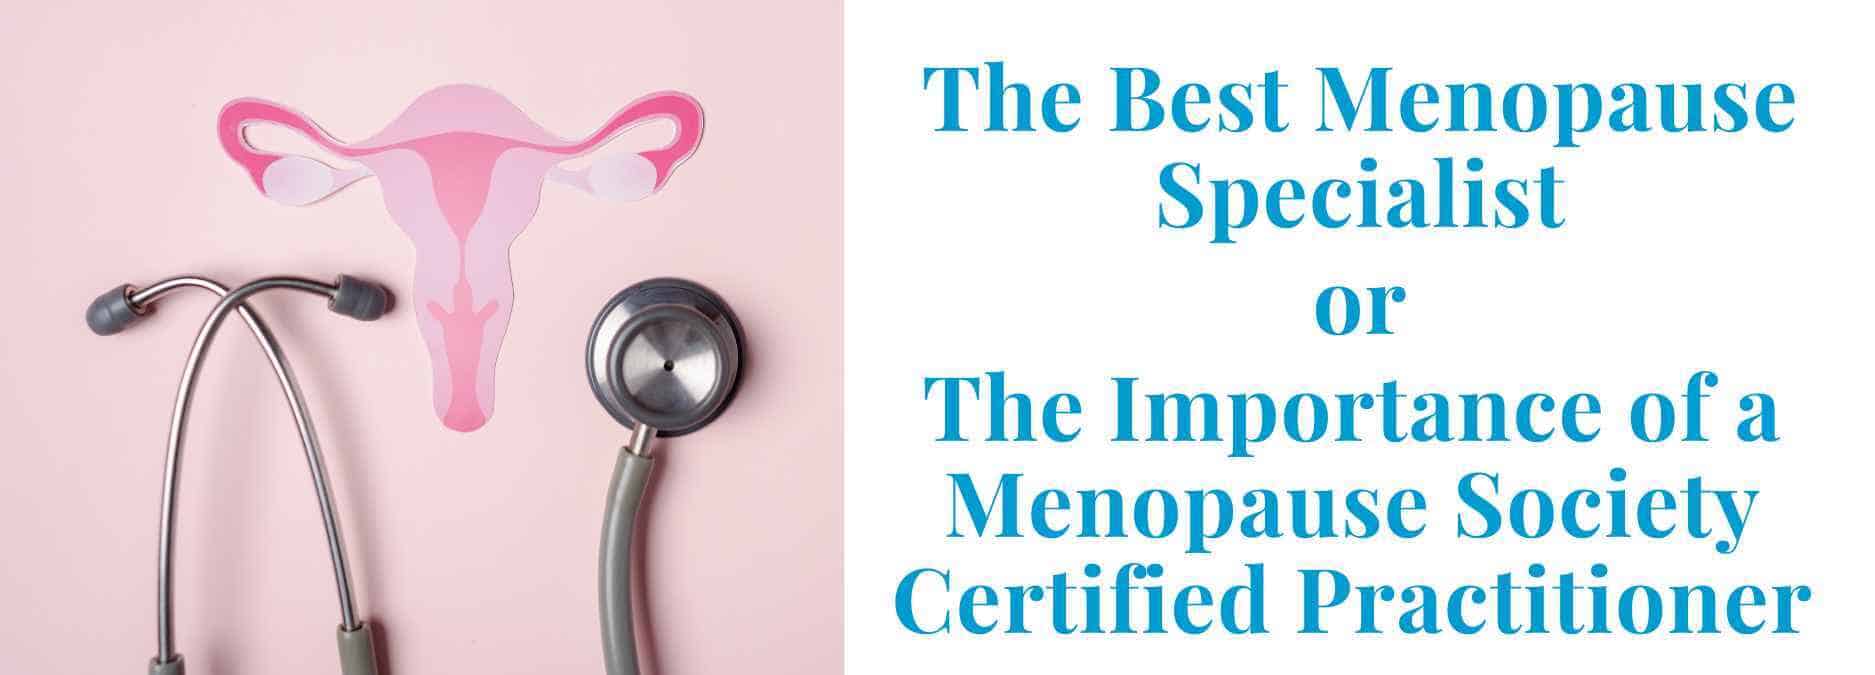 The Best Menopause Specialist or The Importance of a Menopause Society Certified Practitioner